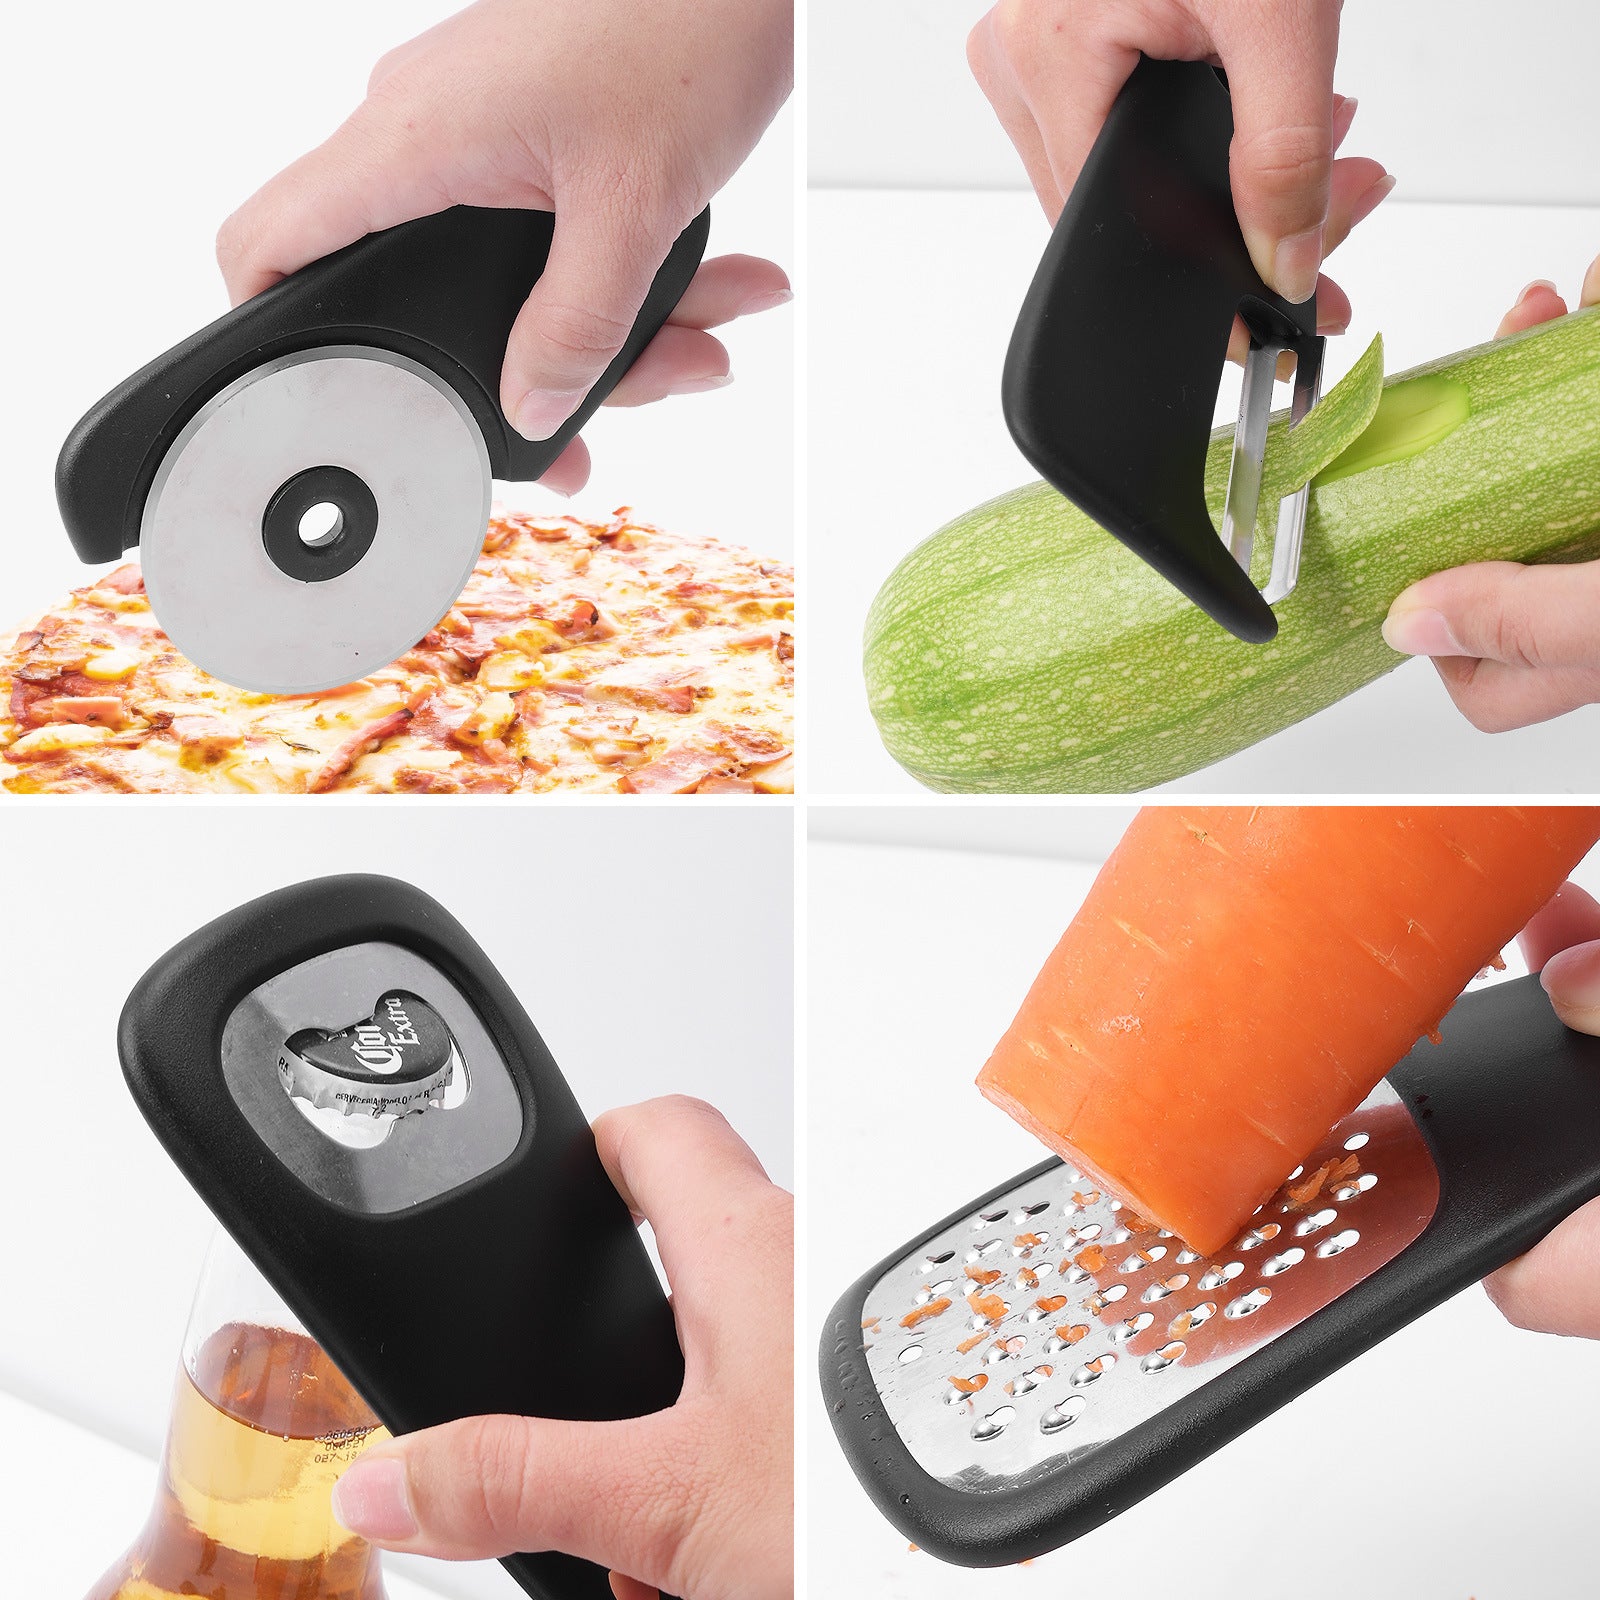 The tool set will allow you to slice pizza, peel vegetables and fruit, grate vegetables and open bottles